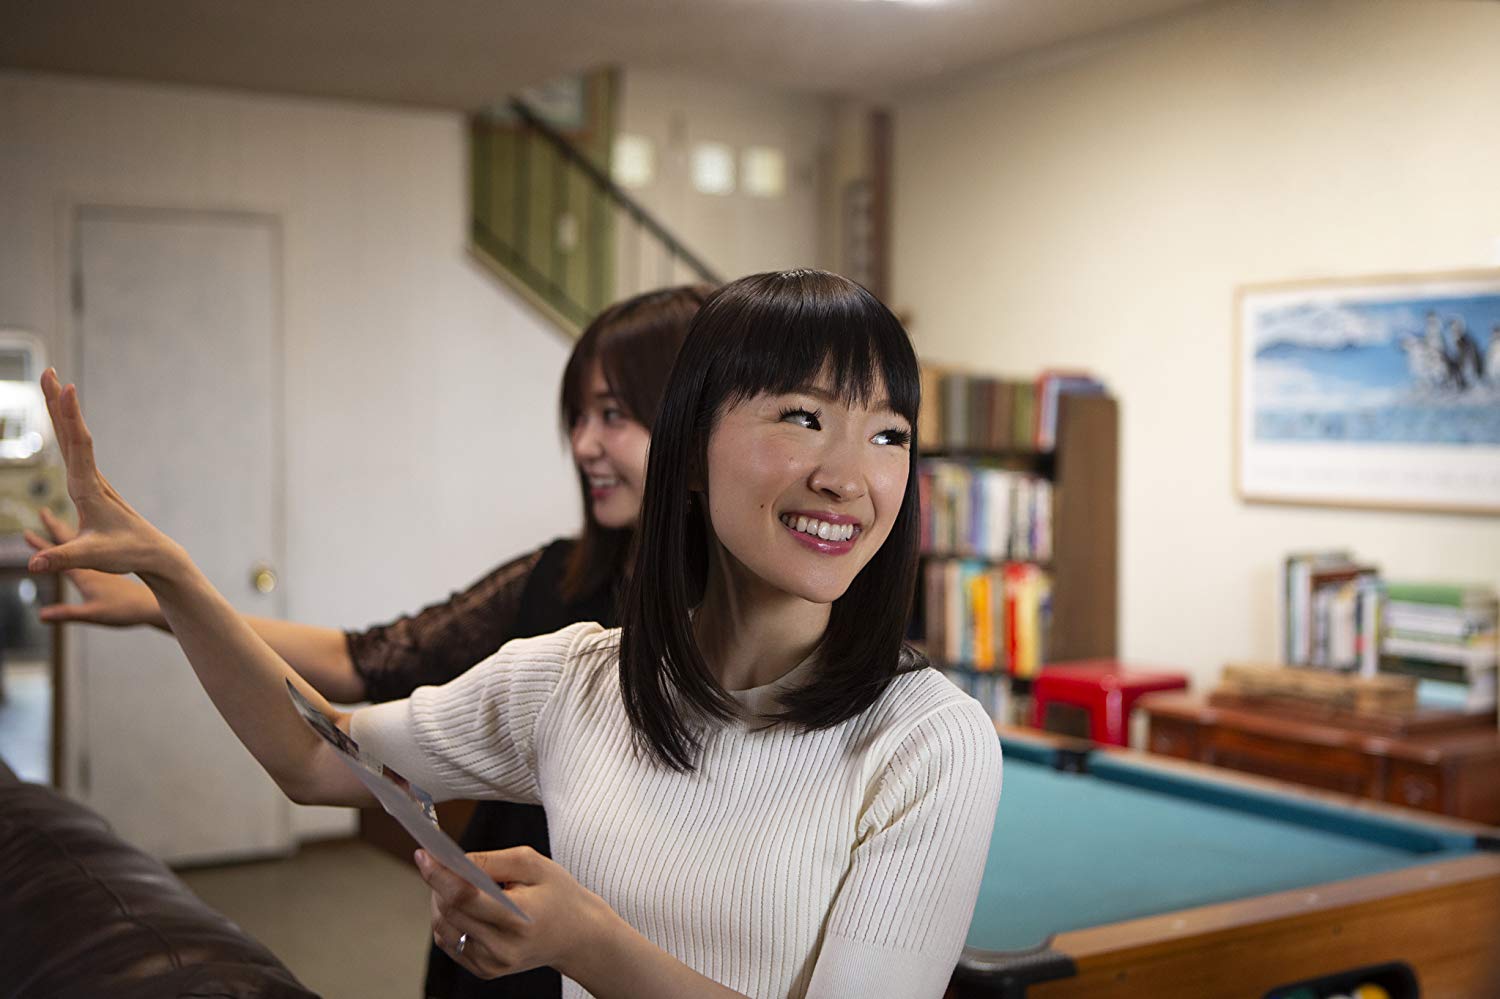 The Not-So-Subtle Racism Behind the Marie Kondo Criticism - PAPER Magazine